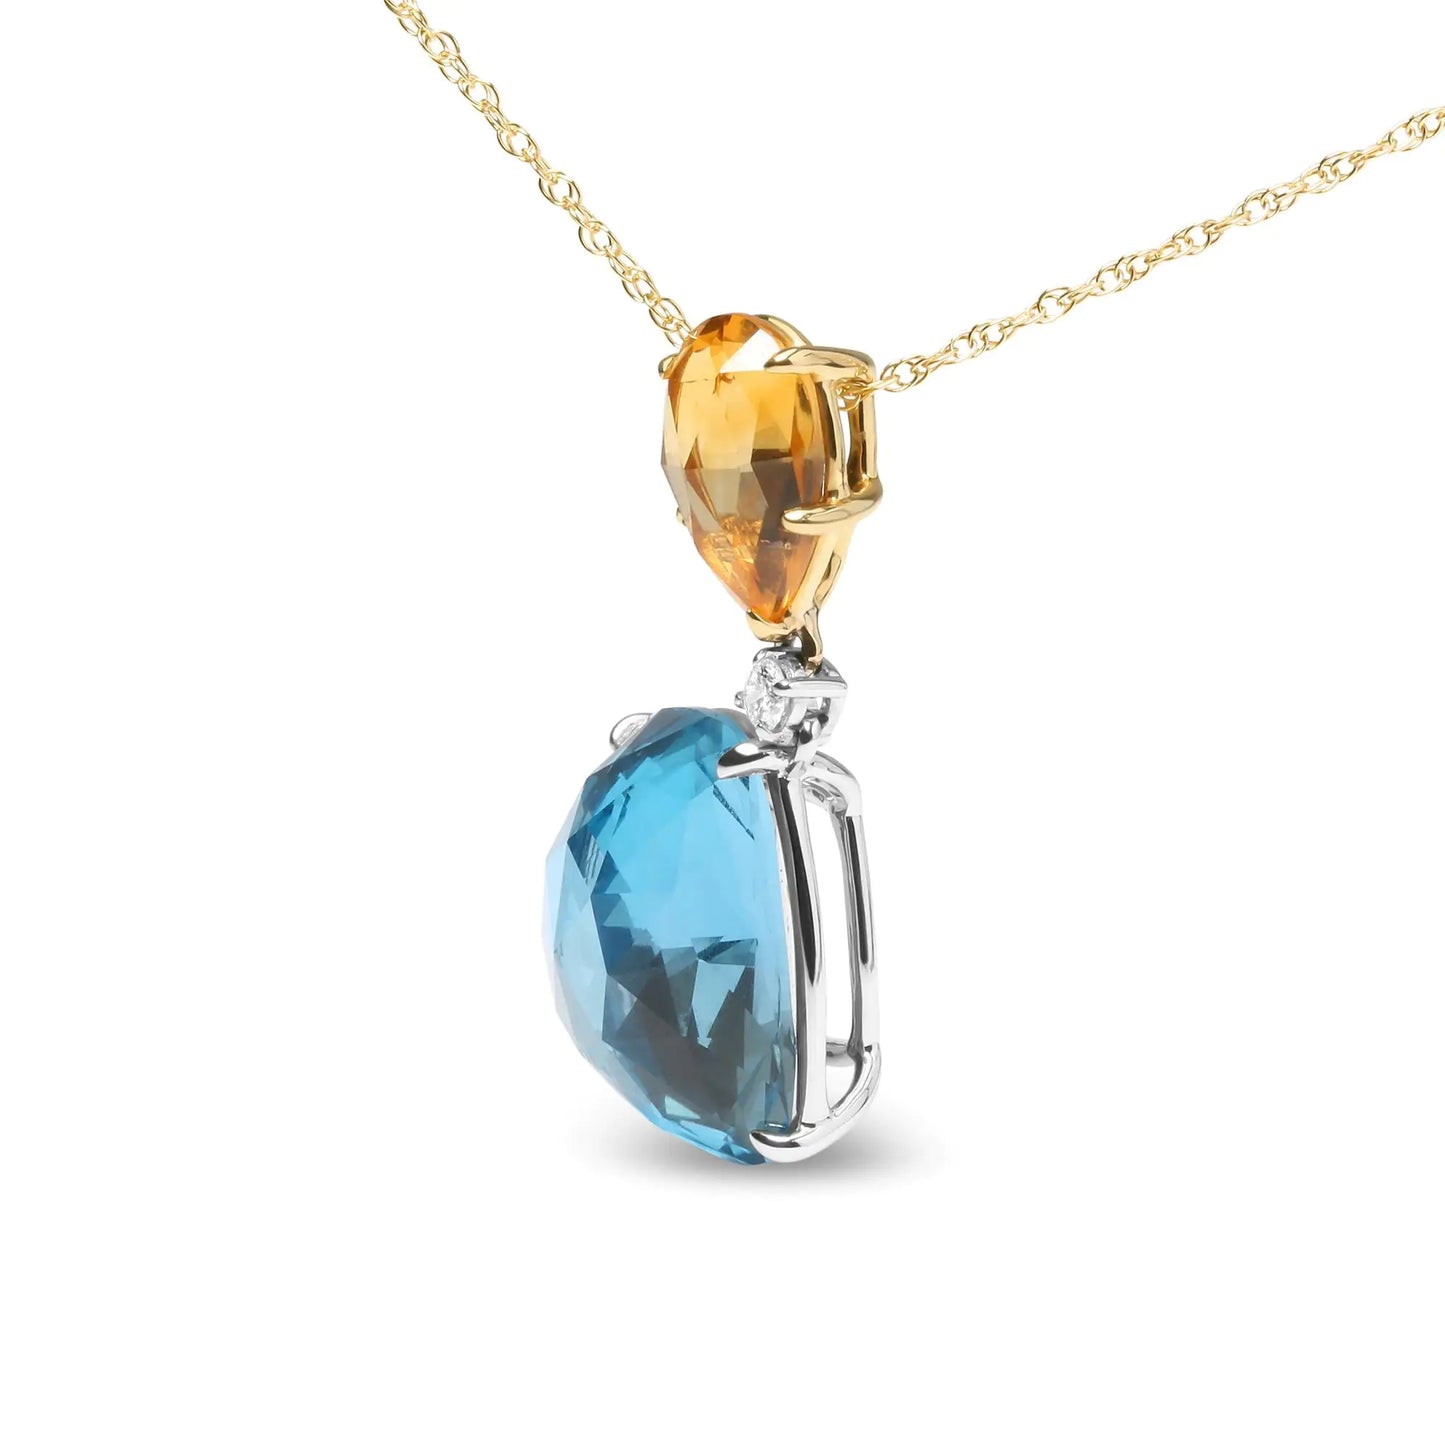 18K White and Yellow Gold Diamond Accent and Pear Cut Lemon Quartz and Cushion Cut London Blue Topaz Gemstone Dangle Drop 18" Pendant Necklace (G-H Color, SI1-SI2 Clarity)